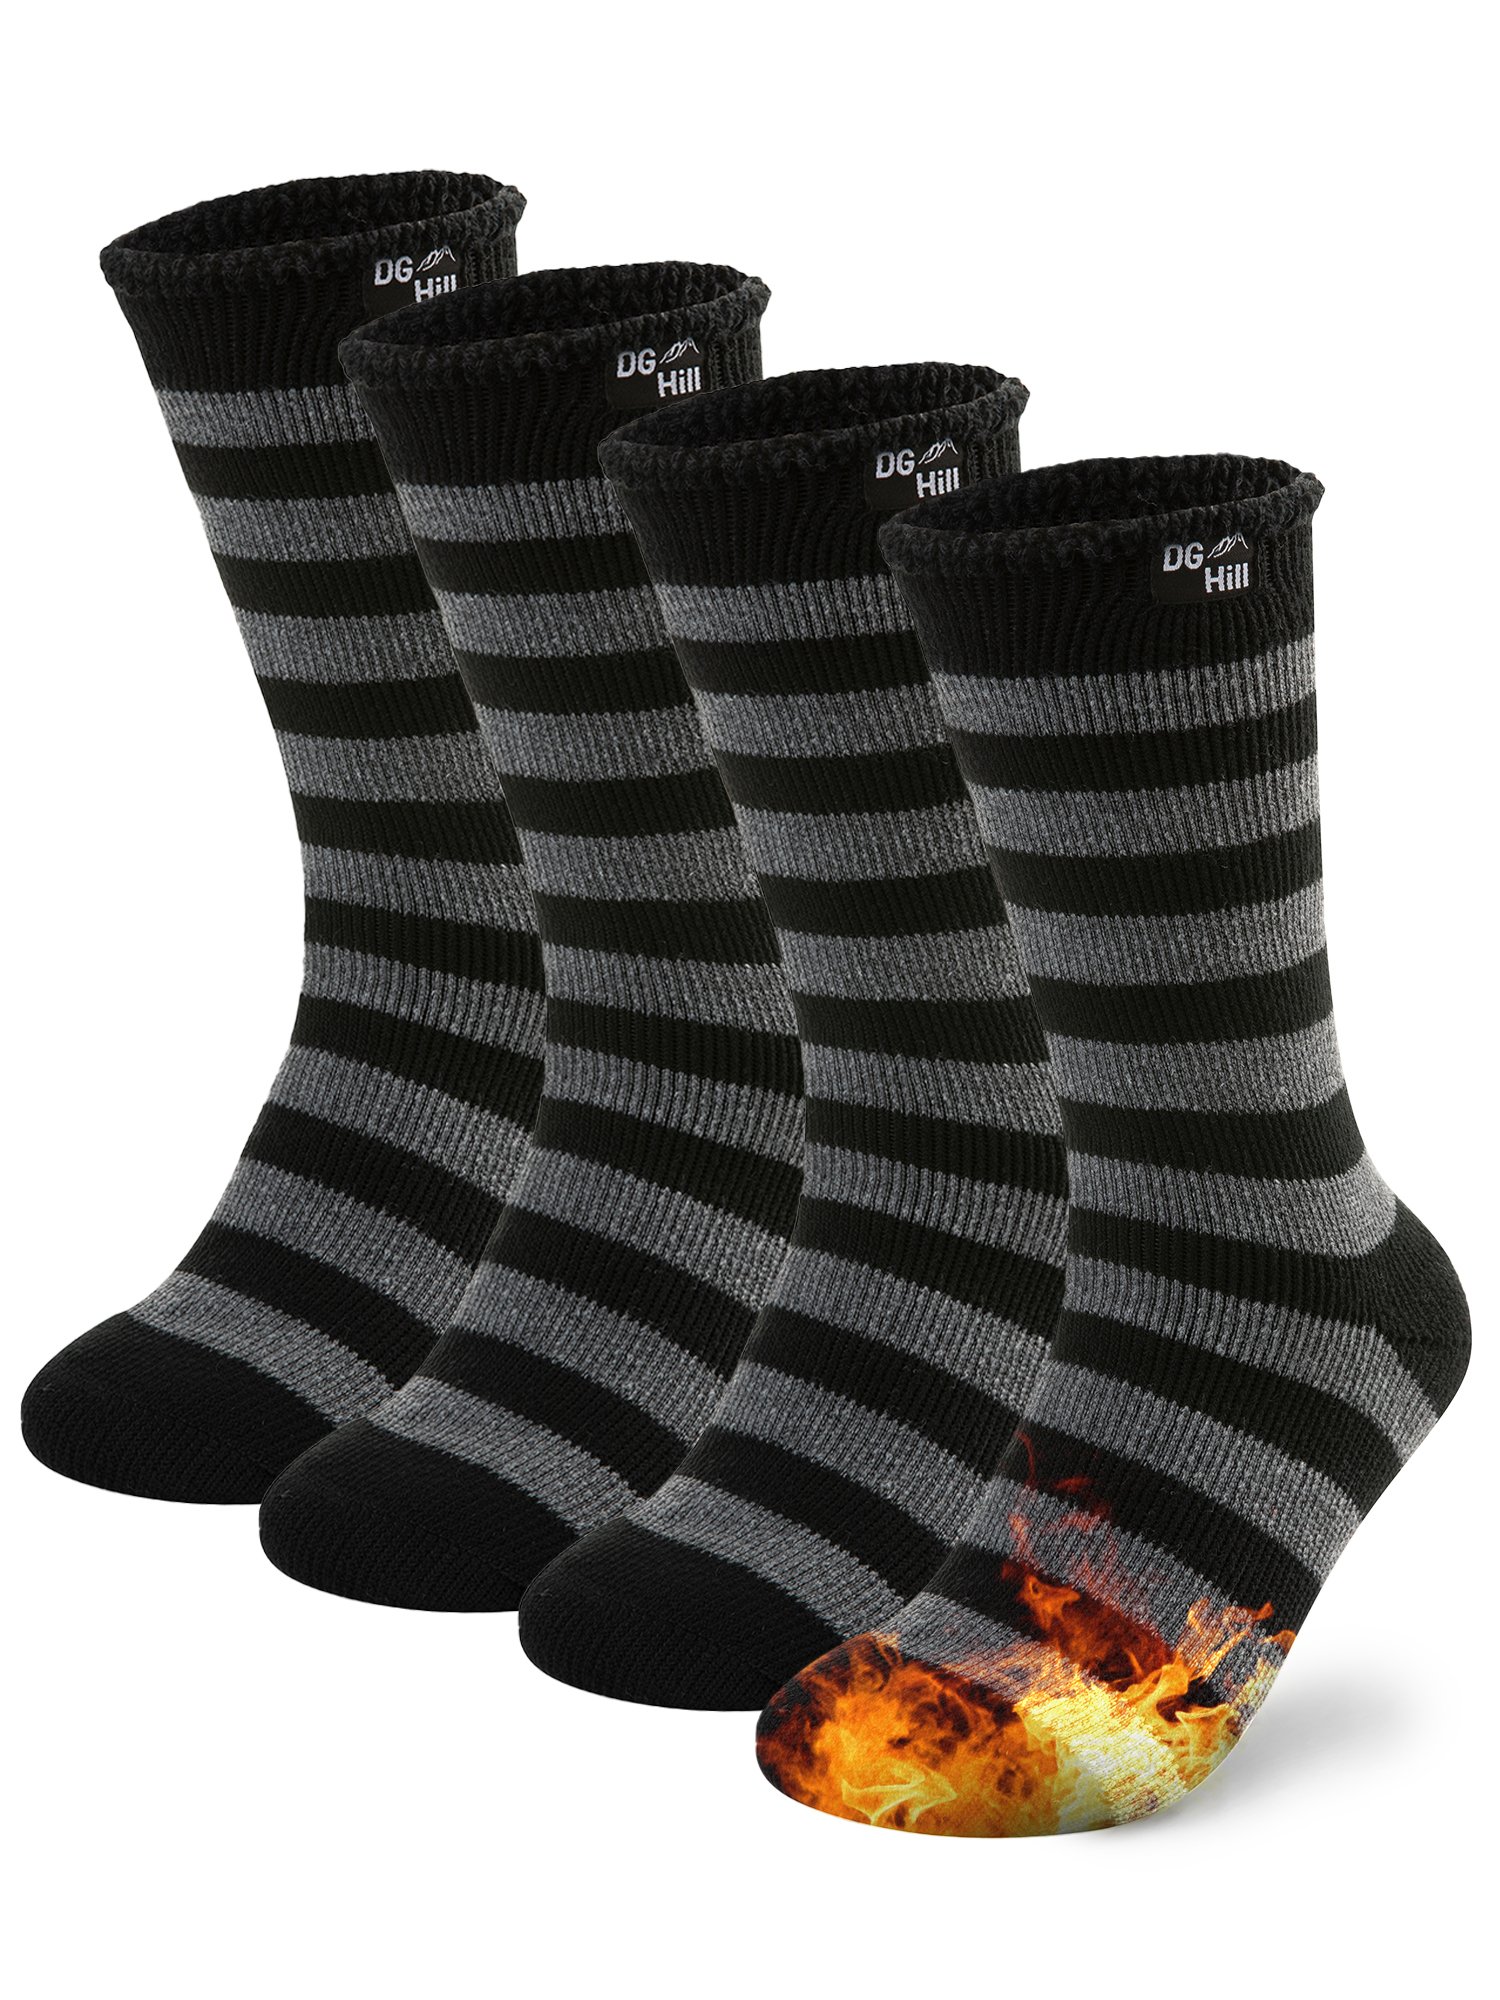 DG Hill Thermal Socks For Men, Heat Trapping Thick Thermal Insulated Winter Crew Socks, 2 Pack - image 1 of 10